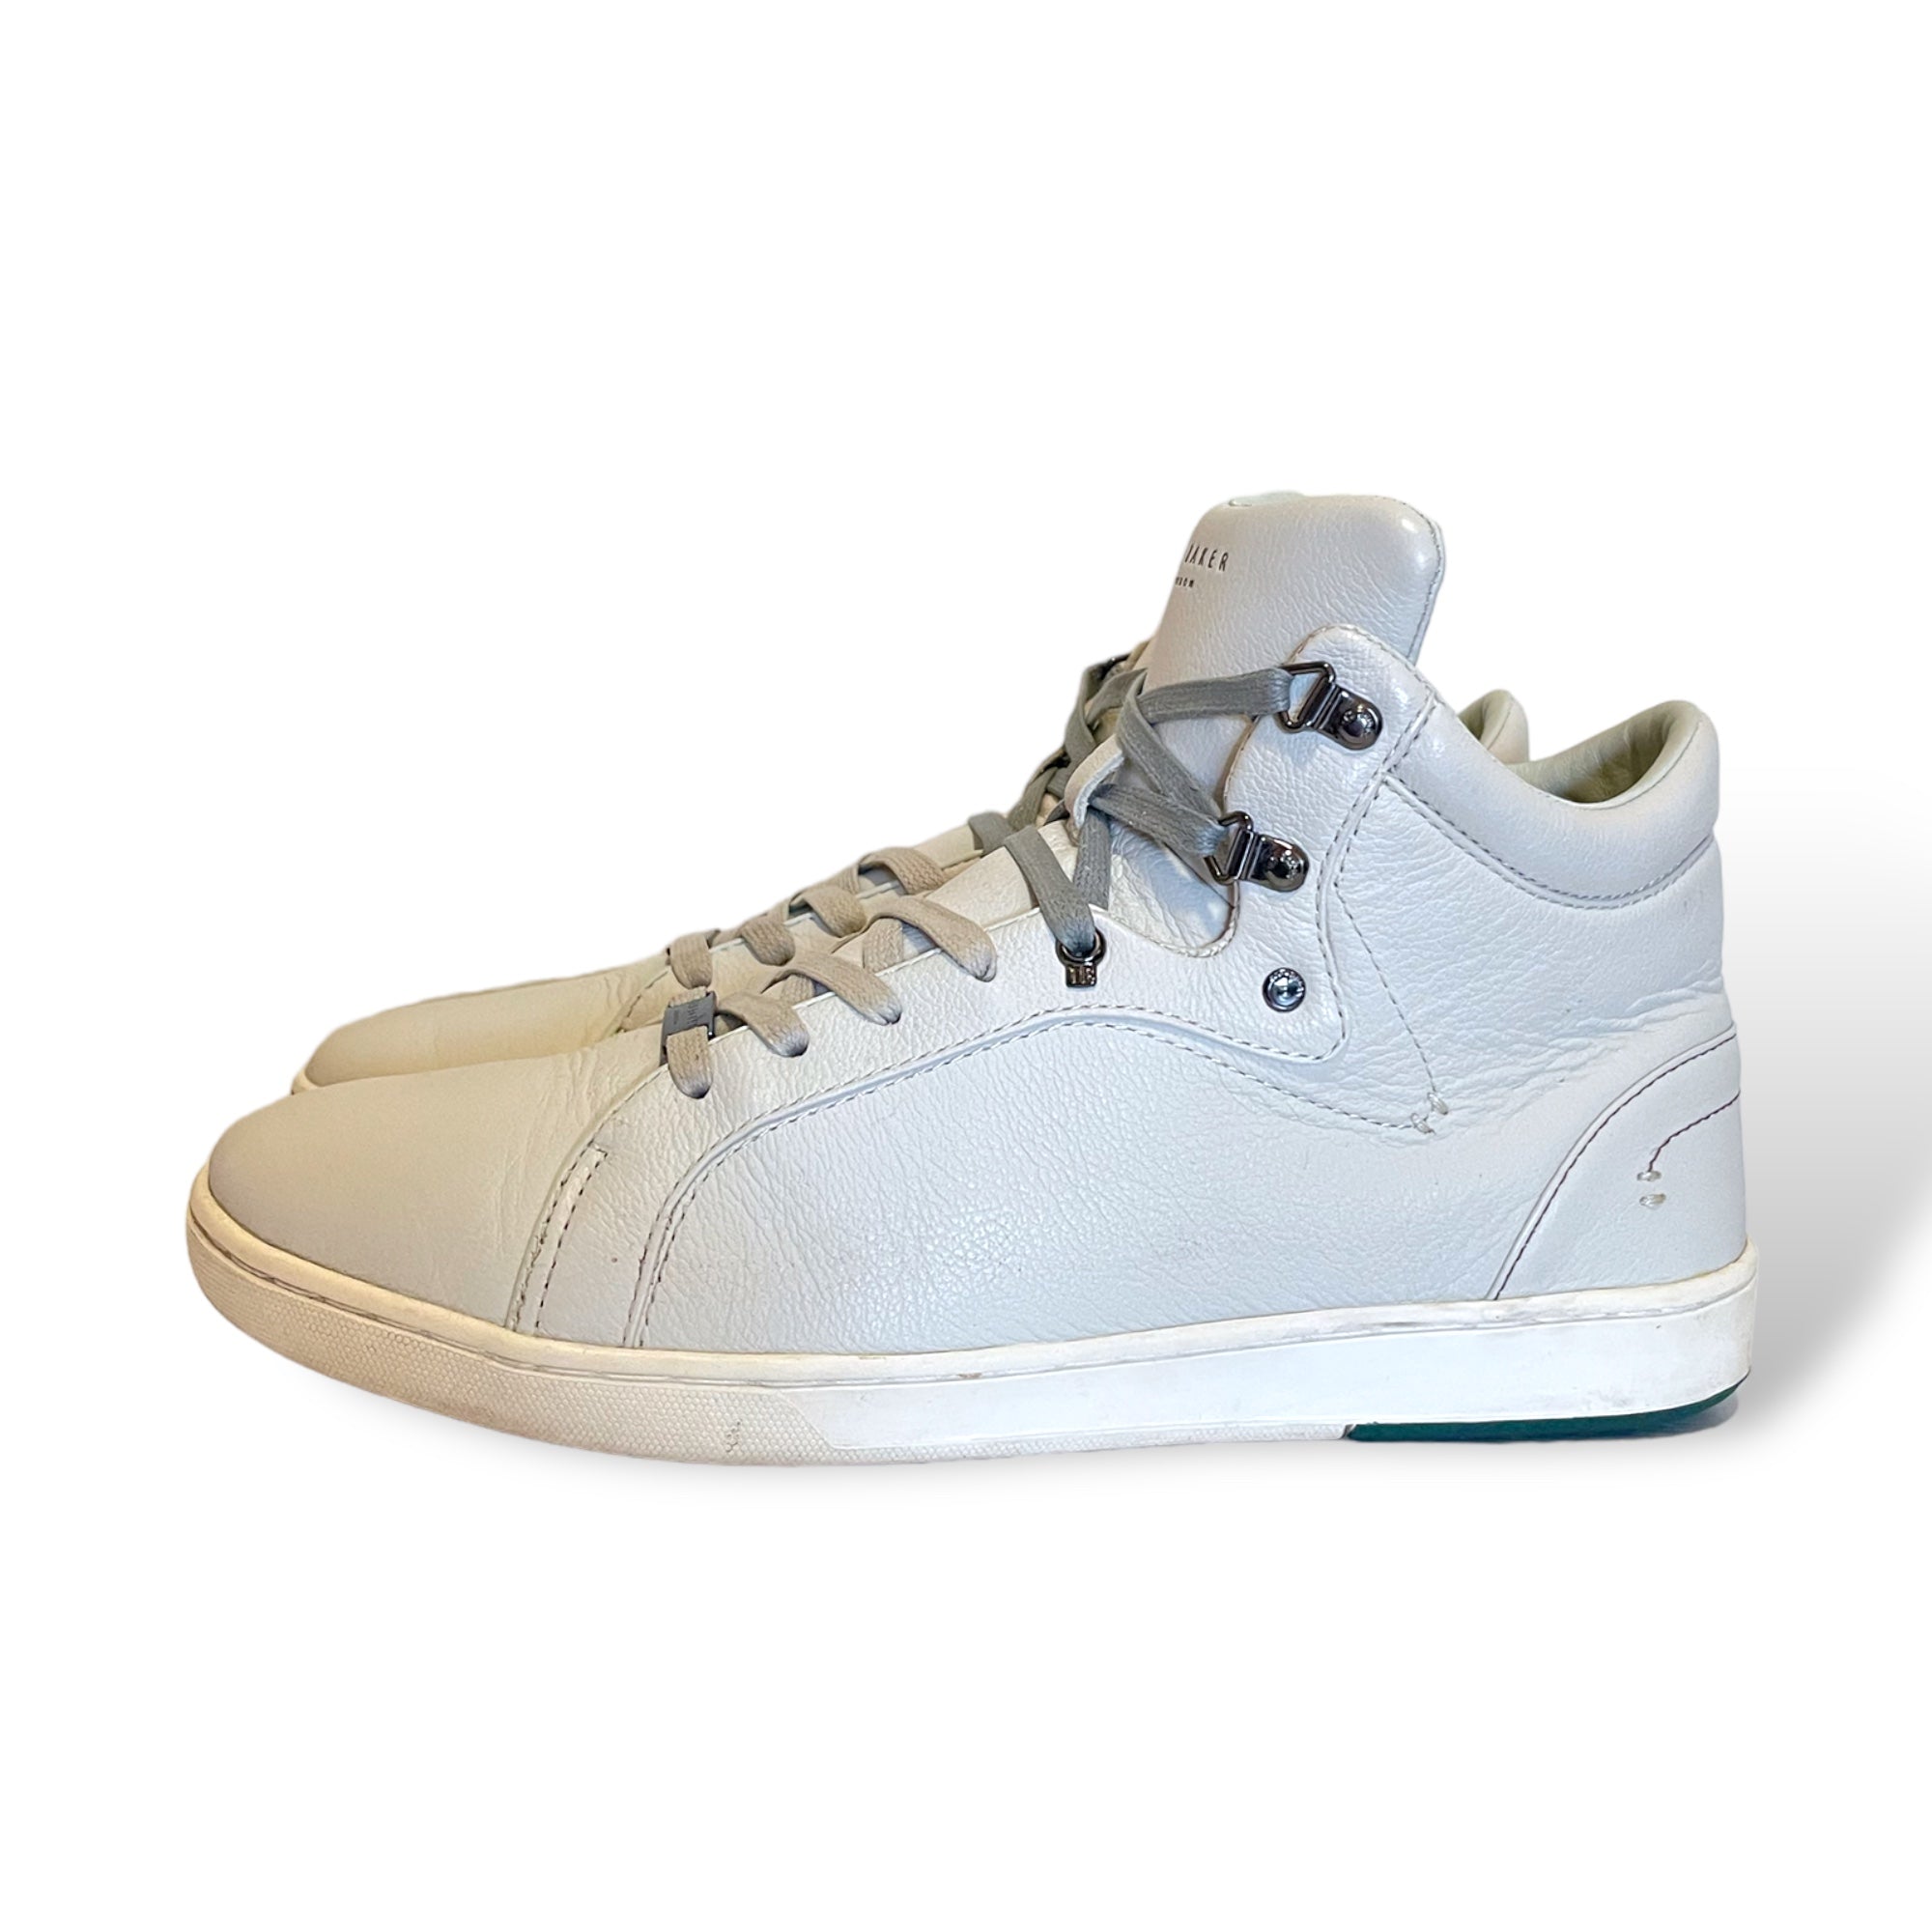 Mens TED BAKER London High-Top Sneakers |Size: 11US|